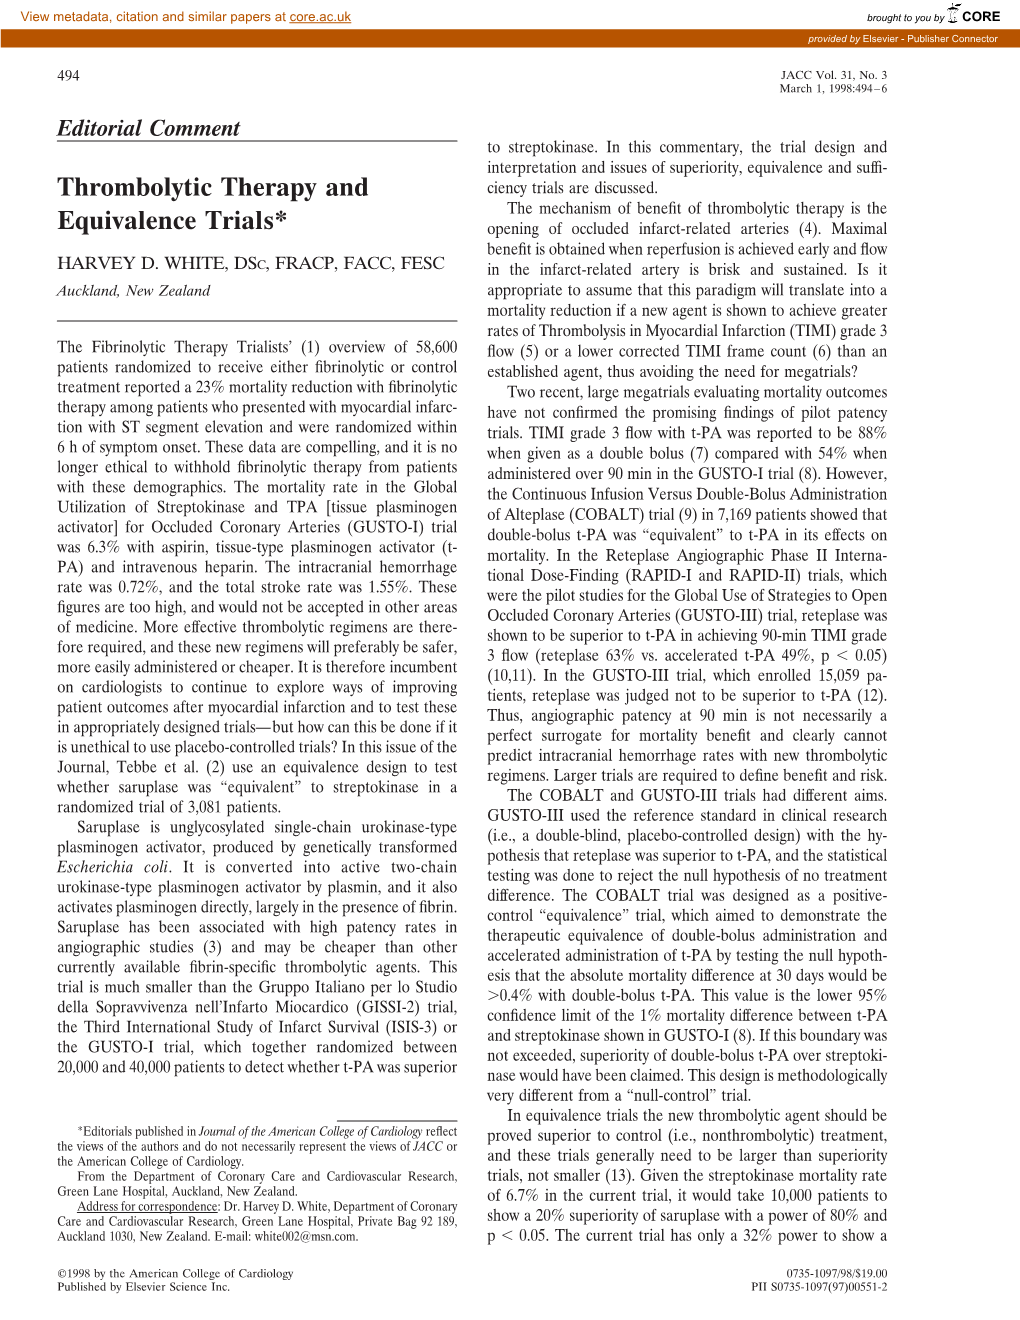 Thrombolytic Therapy and Equivalence Trials*